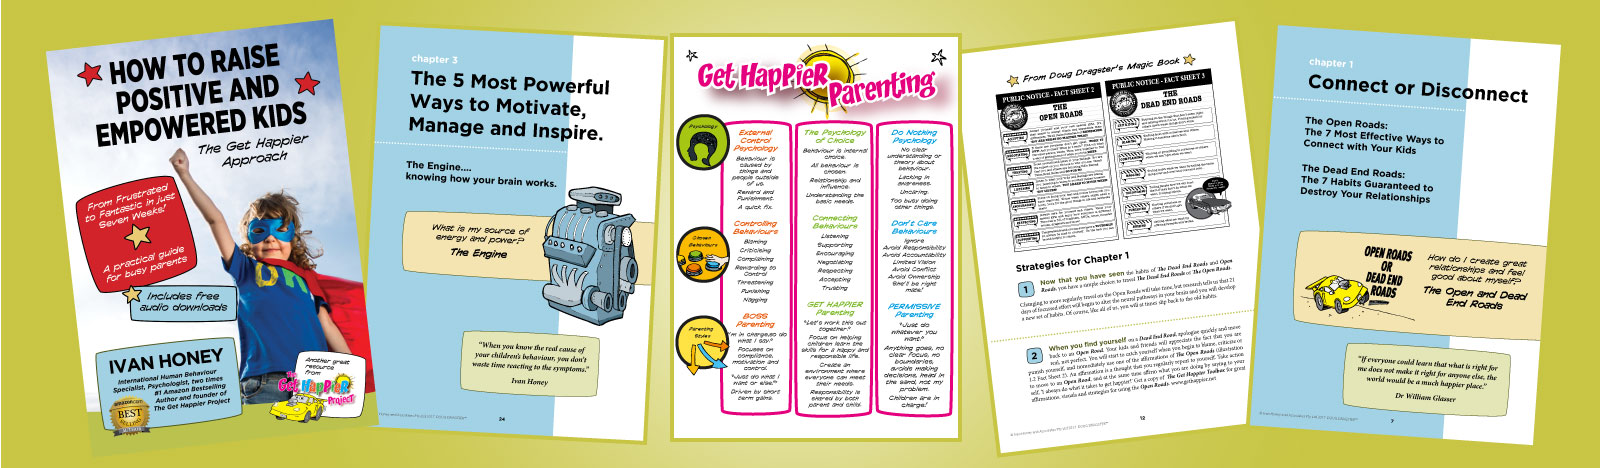 How To Raise Positive and Empowered Kids eBook